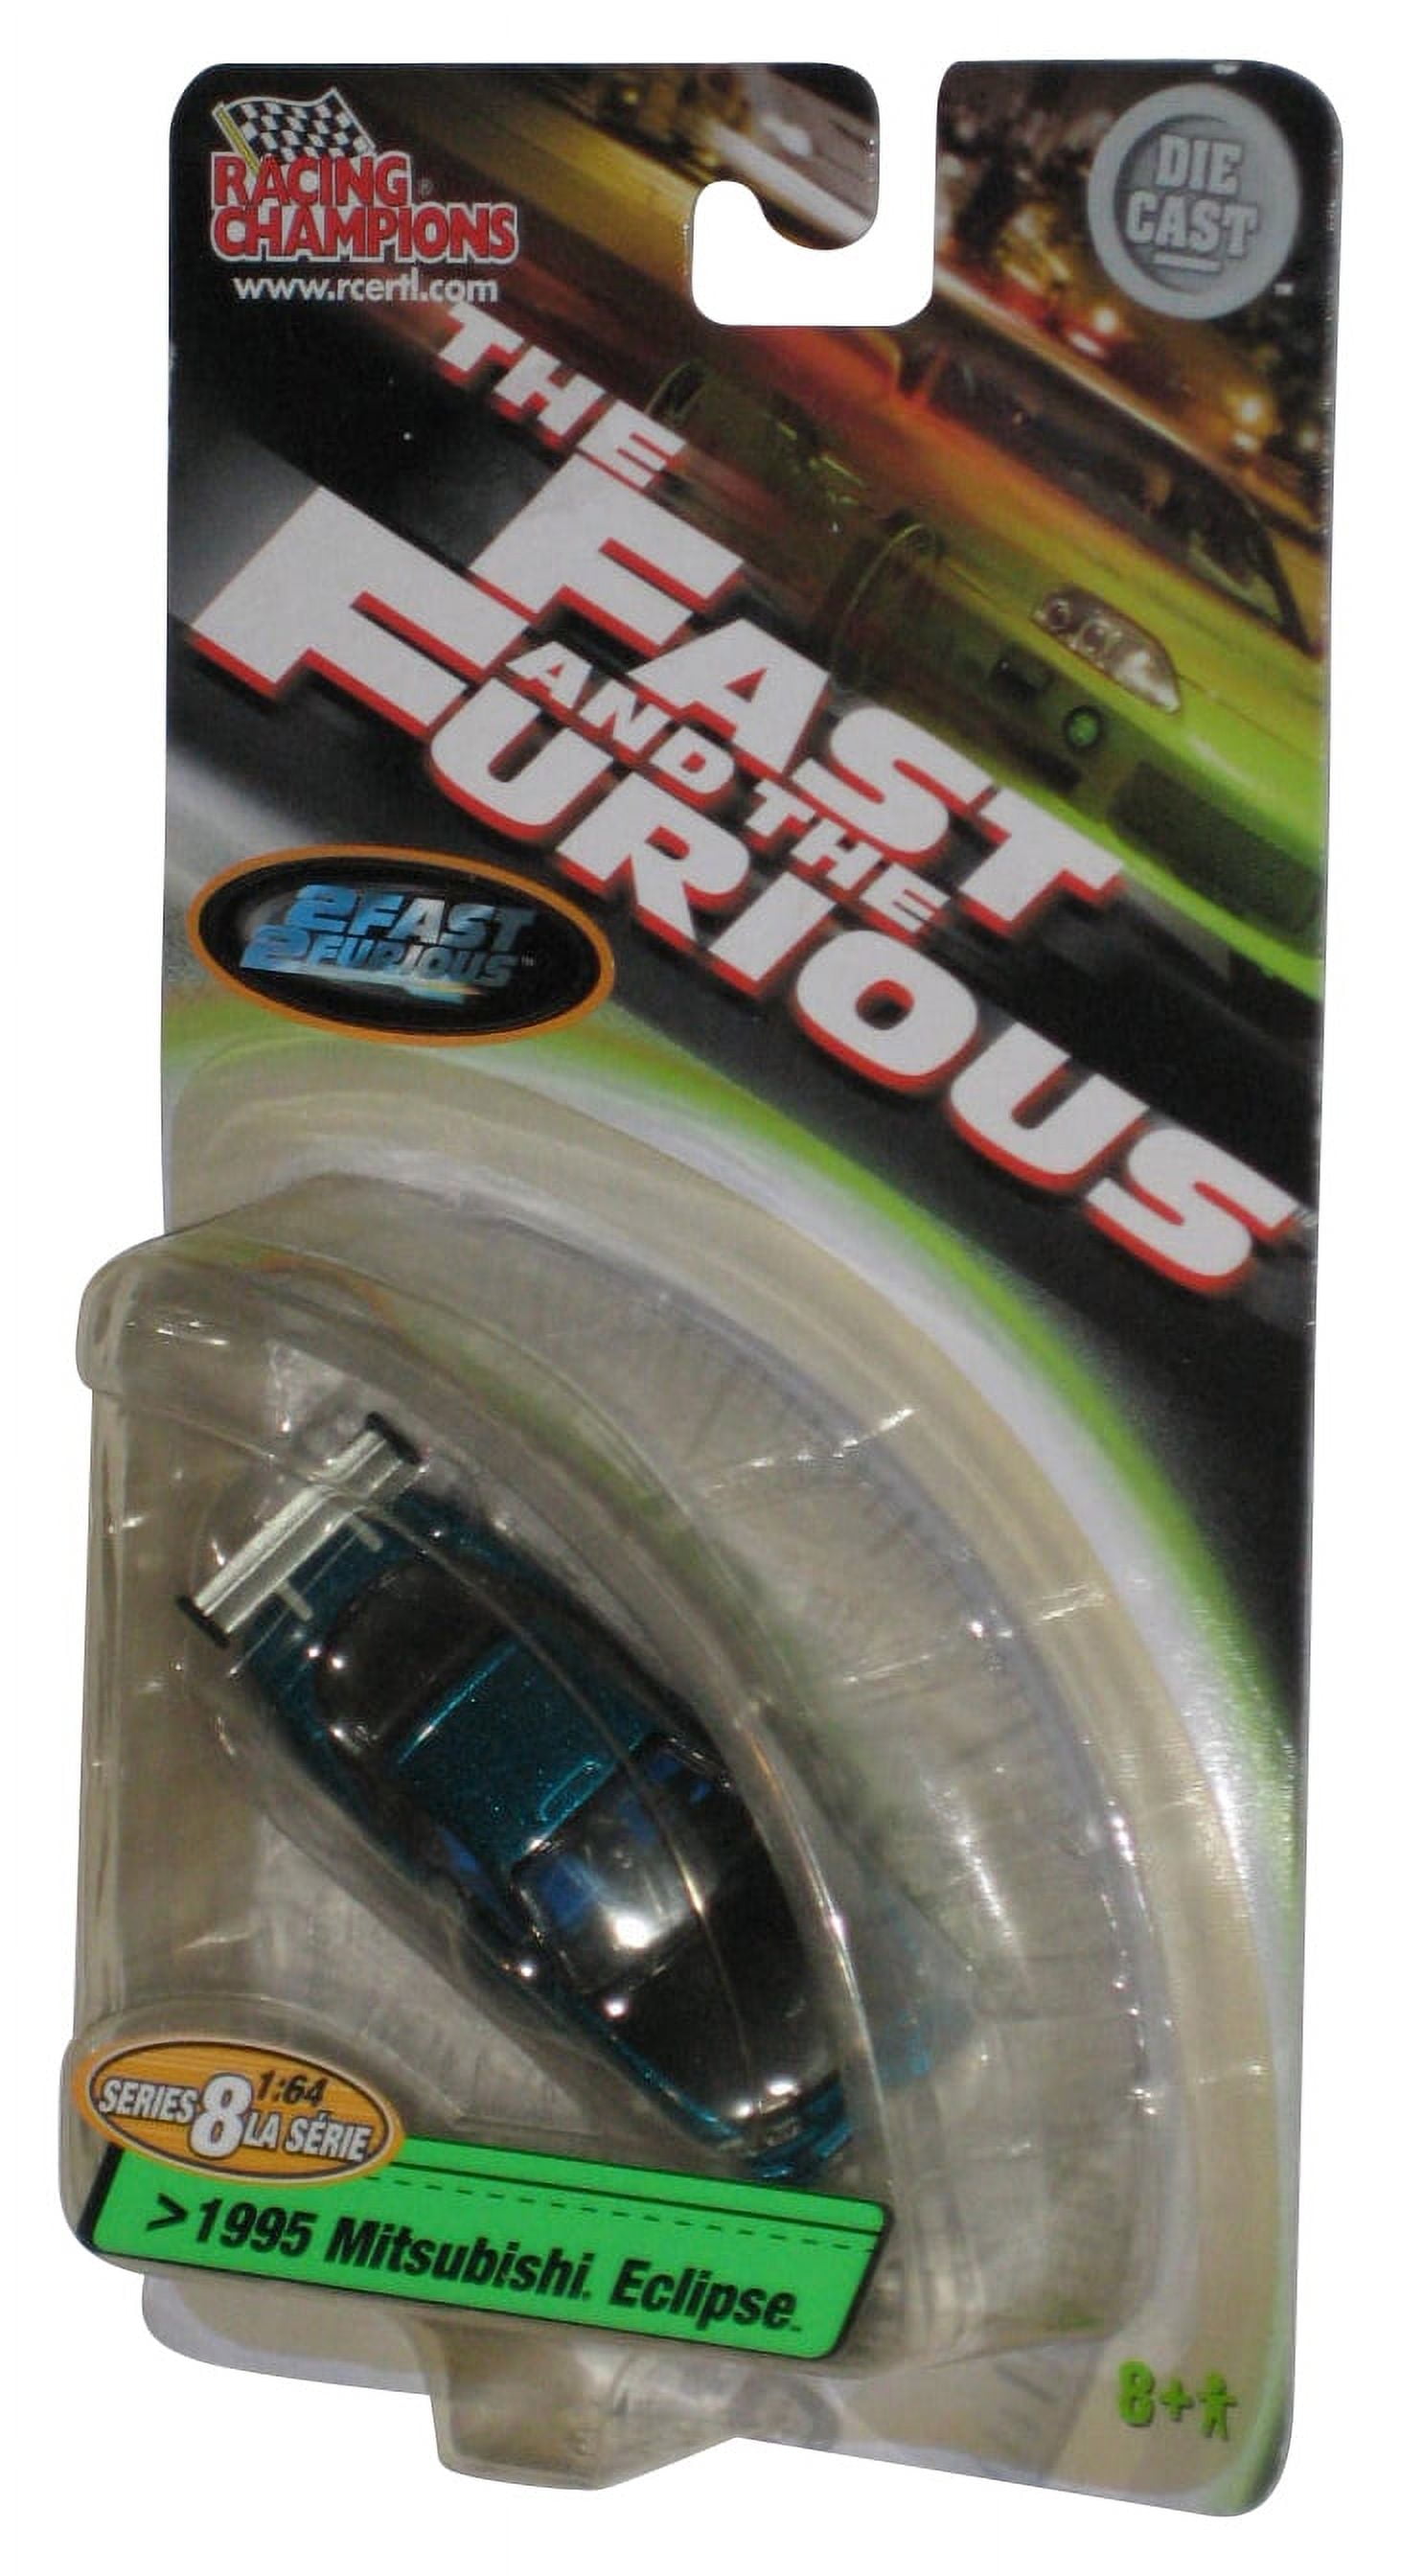 Fast And The Furious (2003) Ertl Green 1995 Mitsubishi Eclipse Series 8 Car